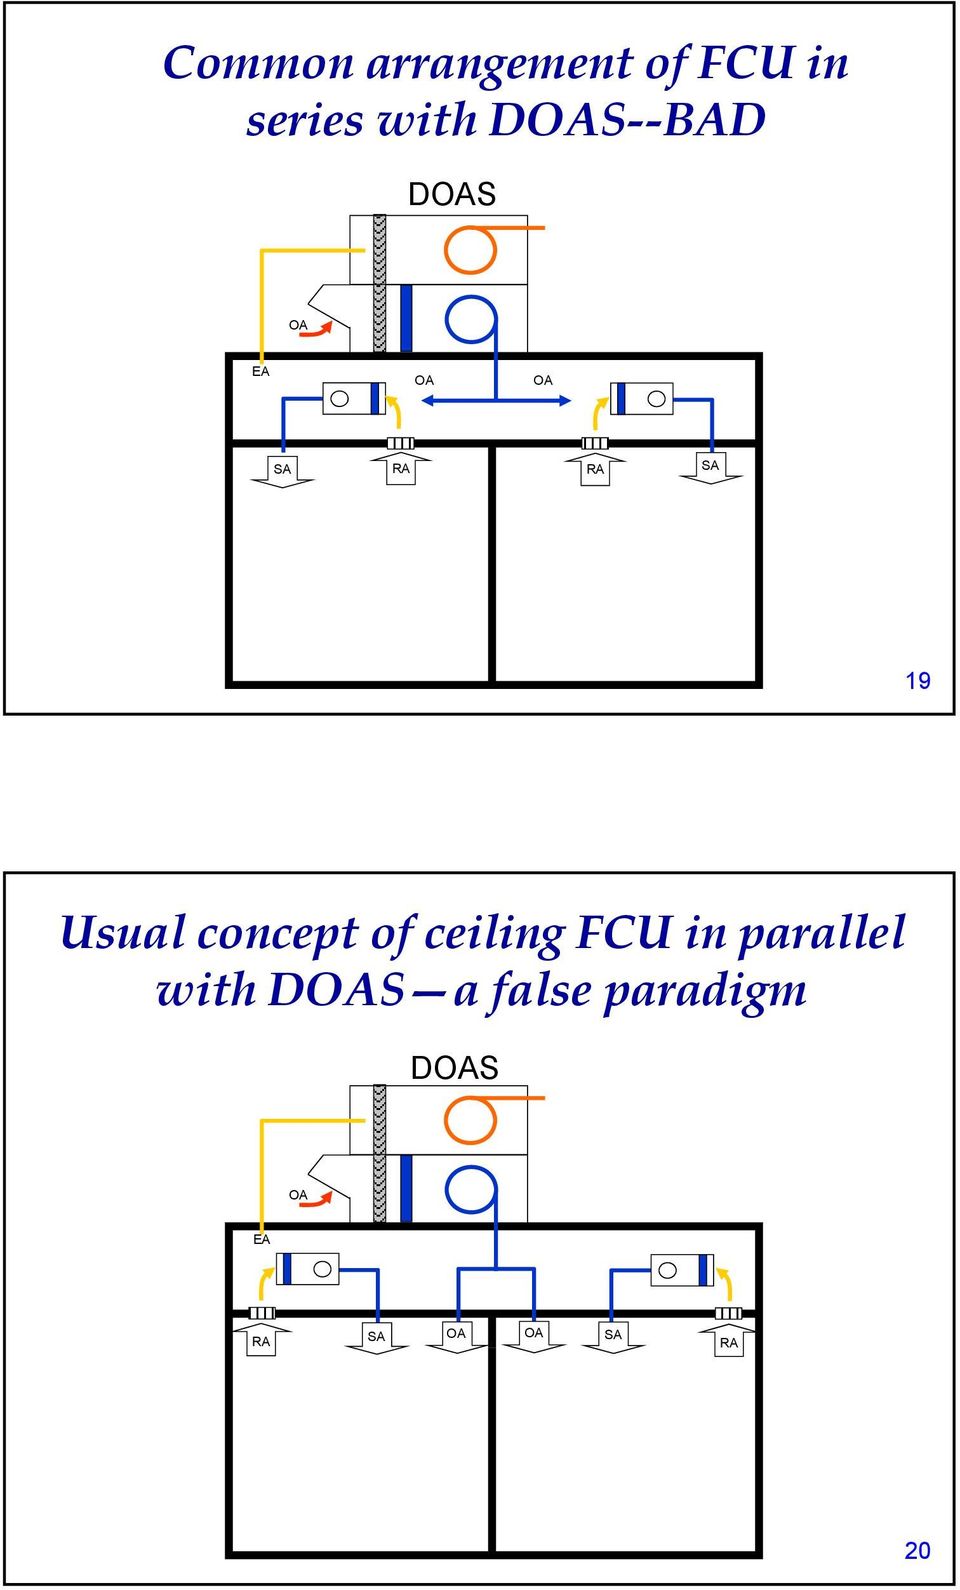 Usual concept of ceiling FCU in parallel with